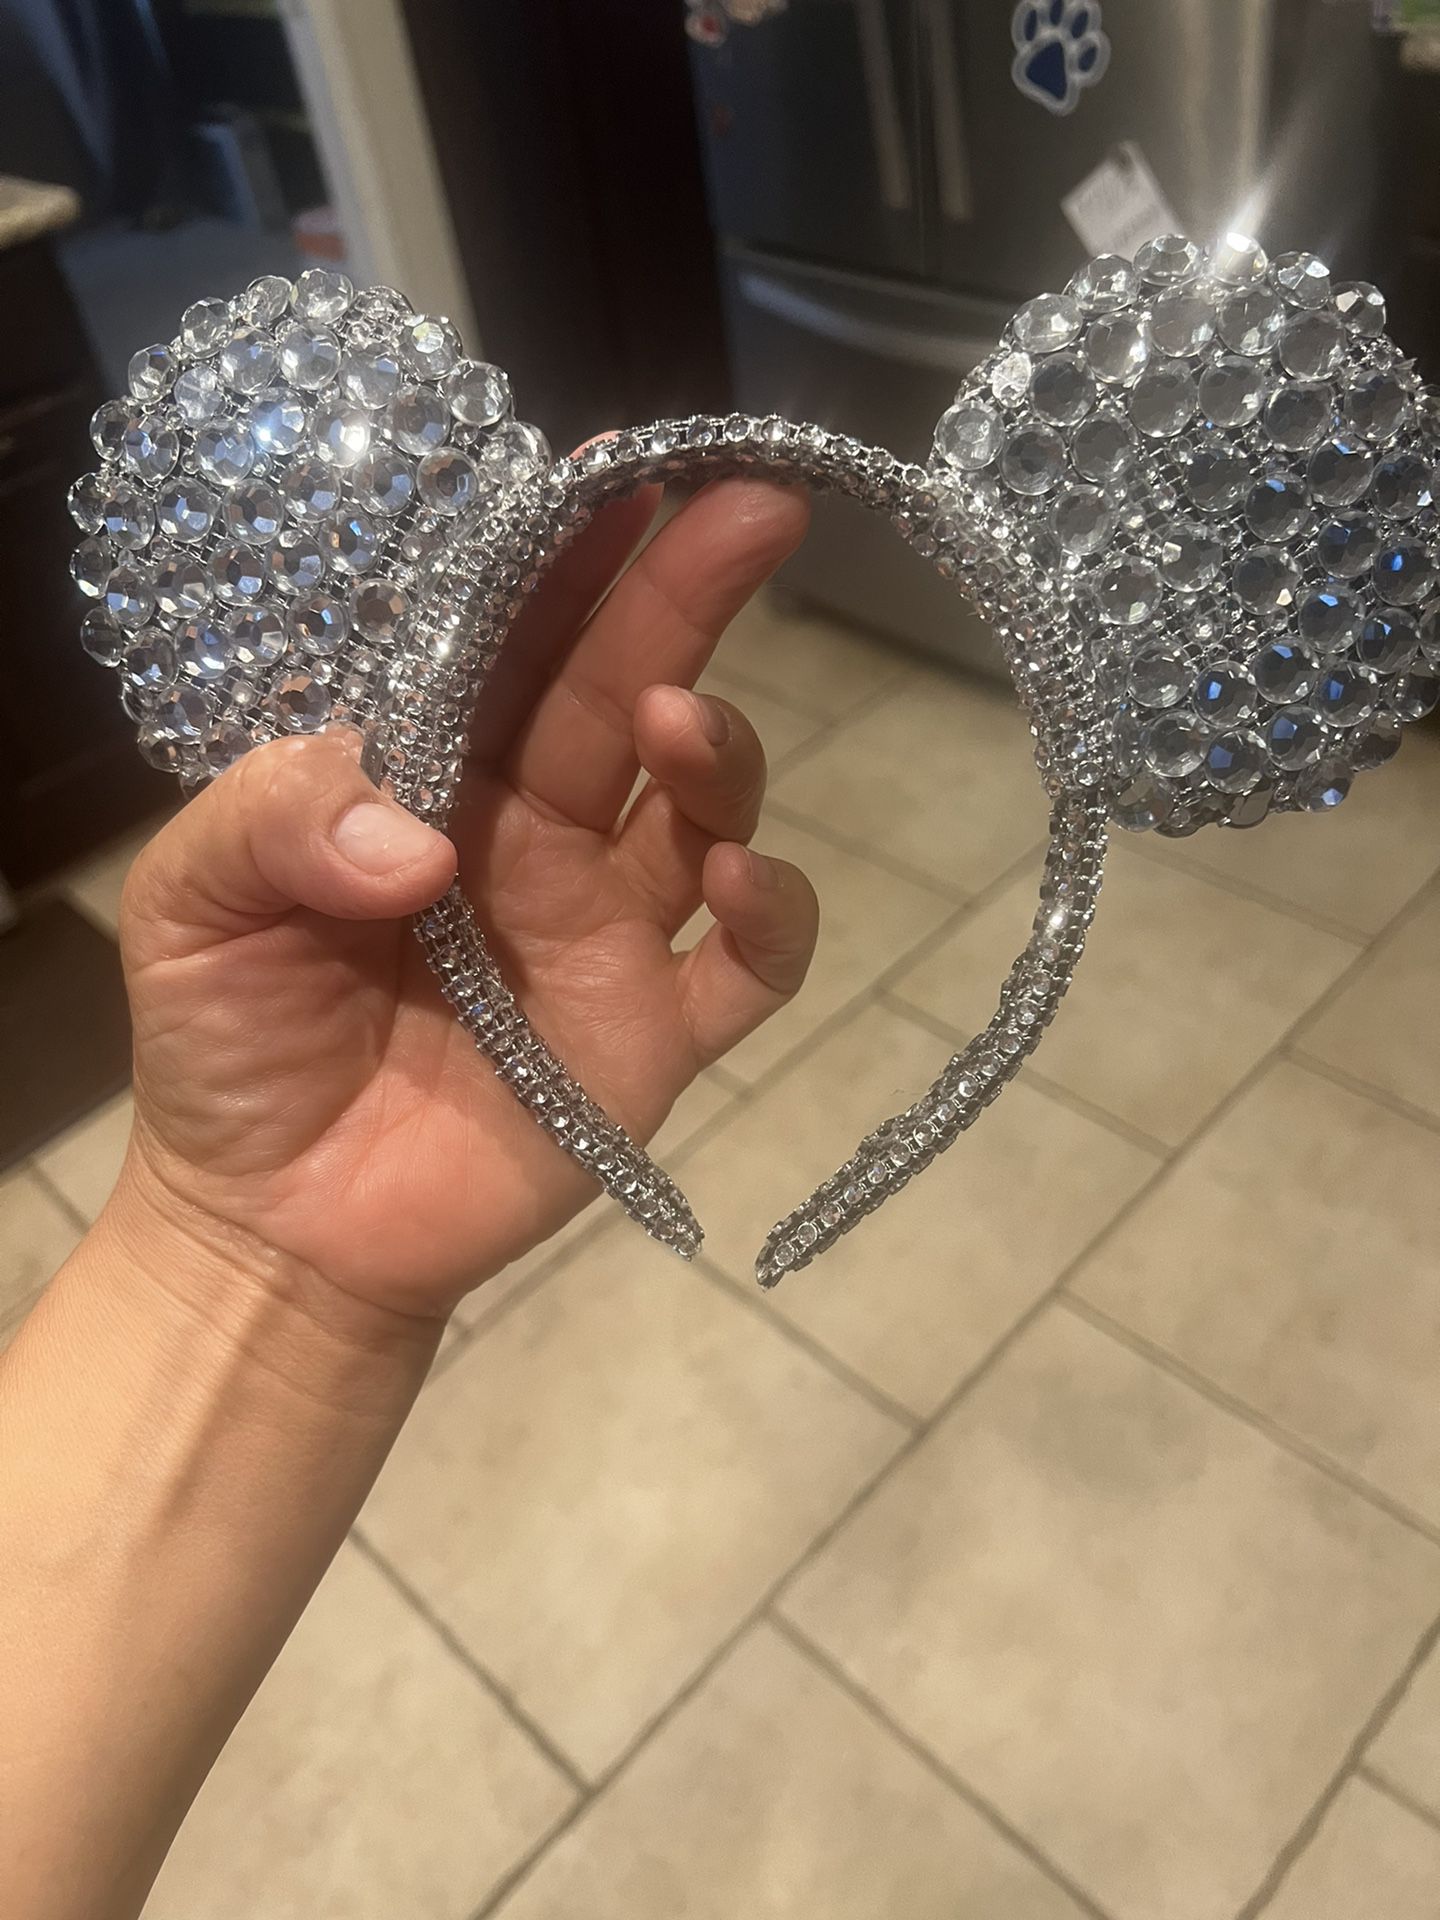 Mickey Mouse Bling Ears